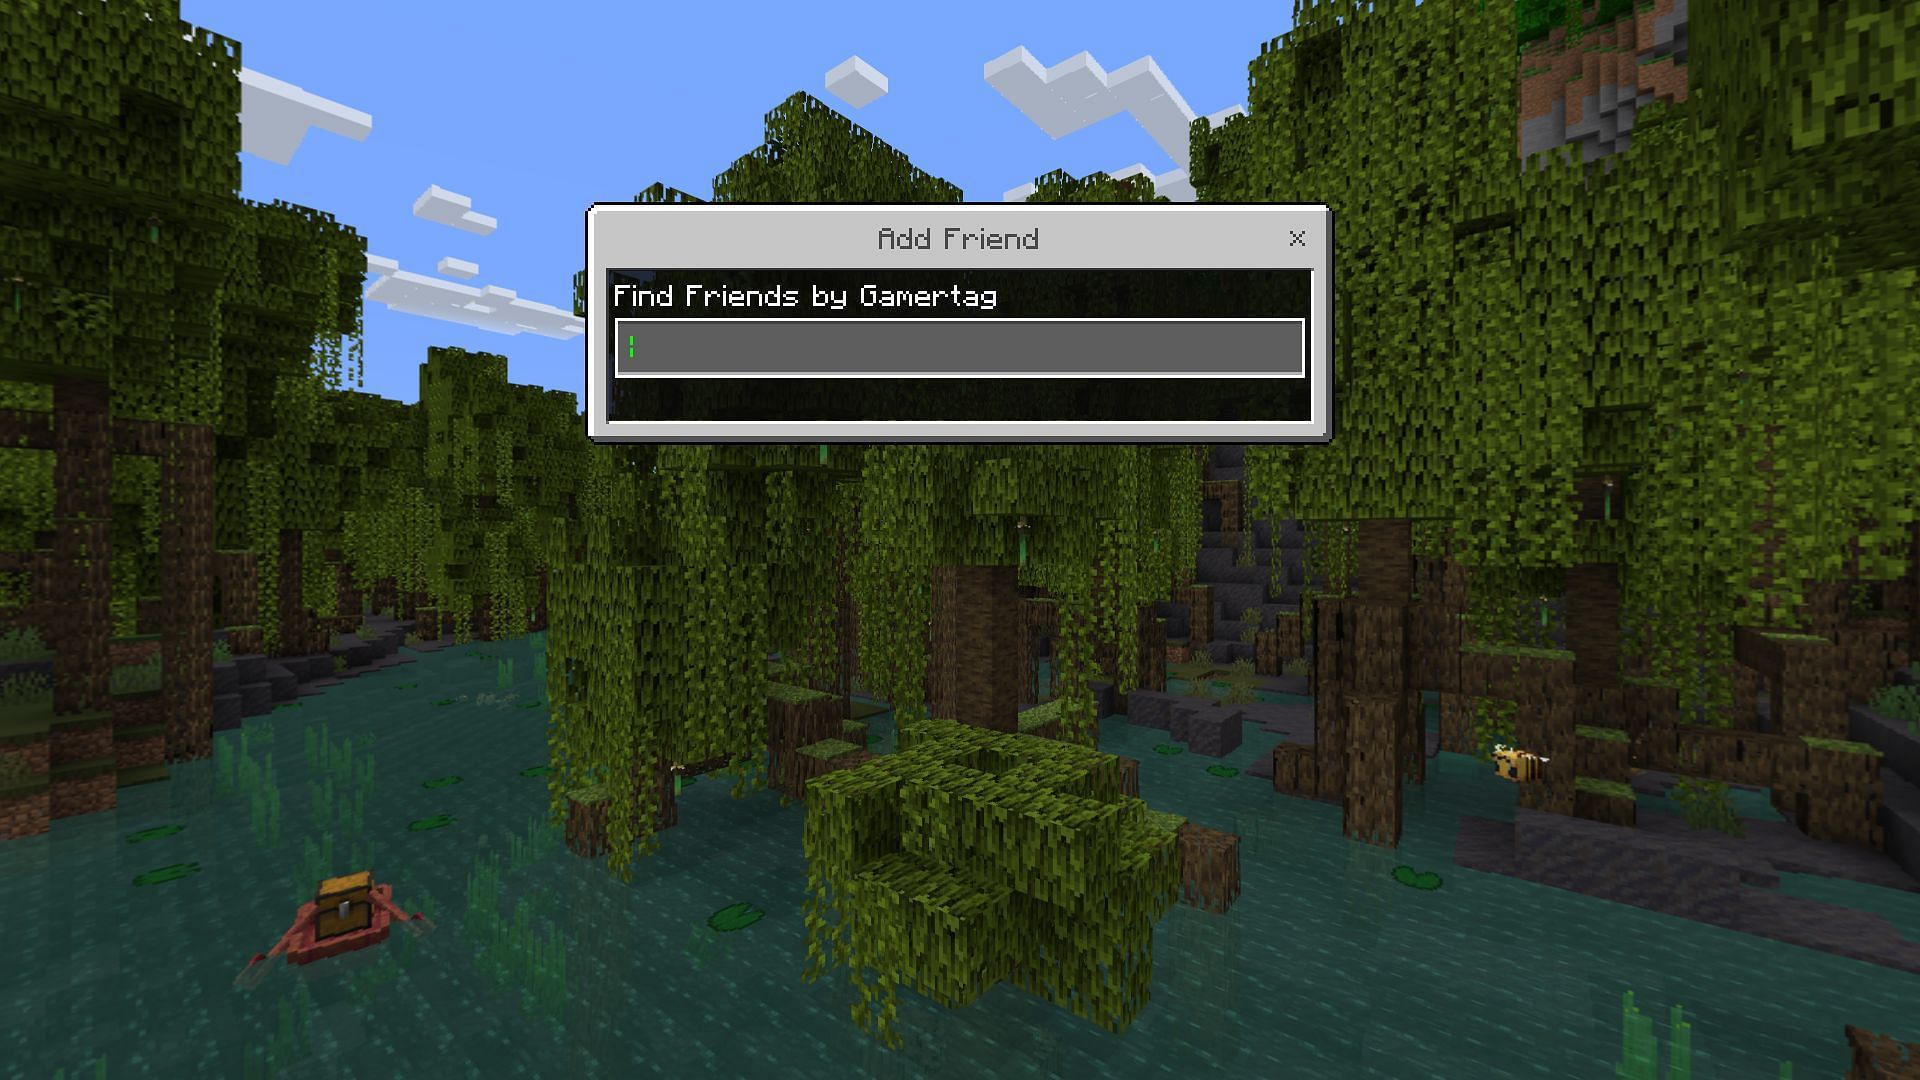 Players must insert exact gamertag to pinpoint their friends (Image via Minecraft 1.19 update)